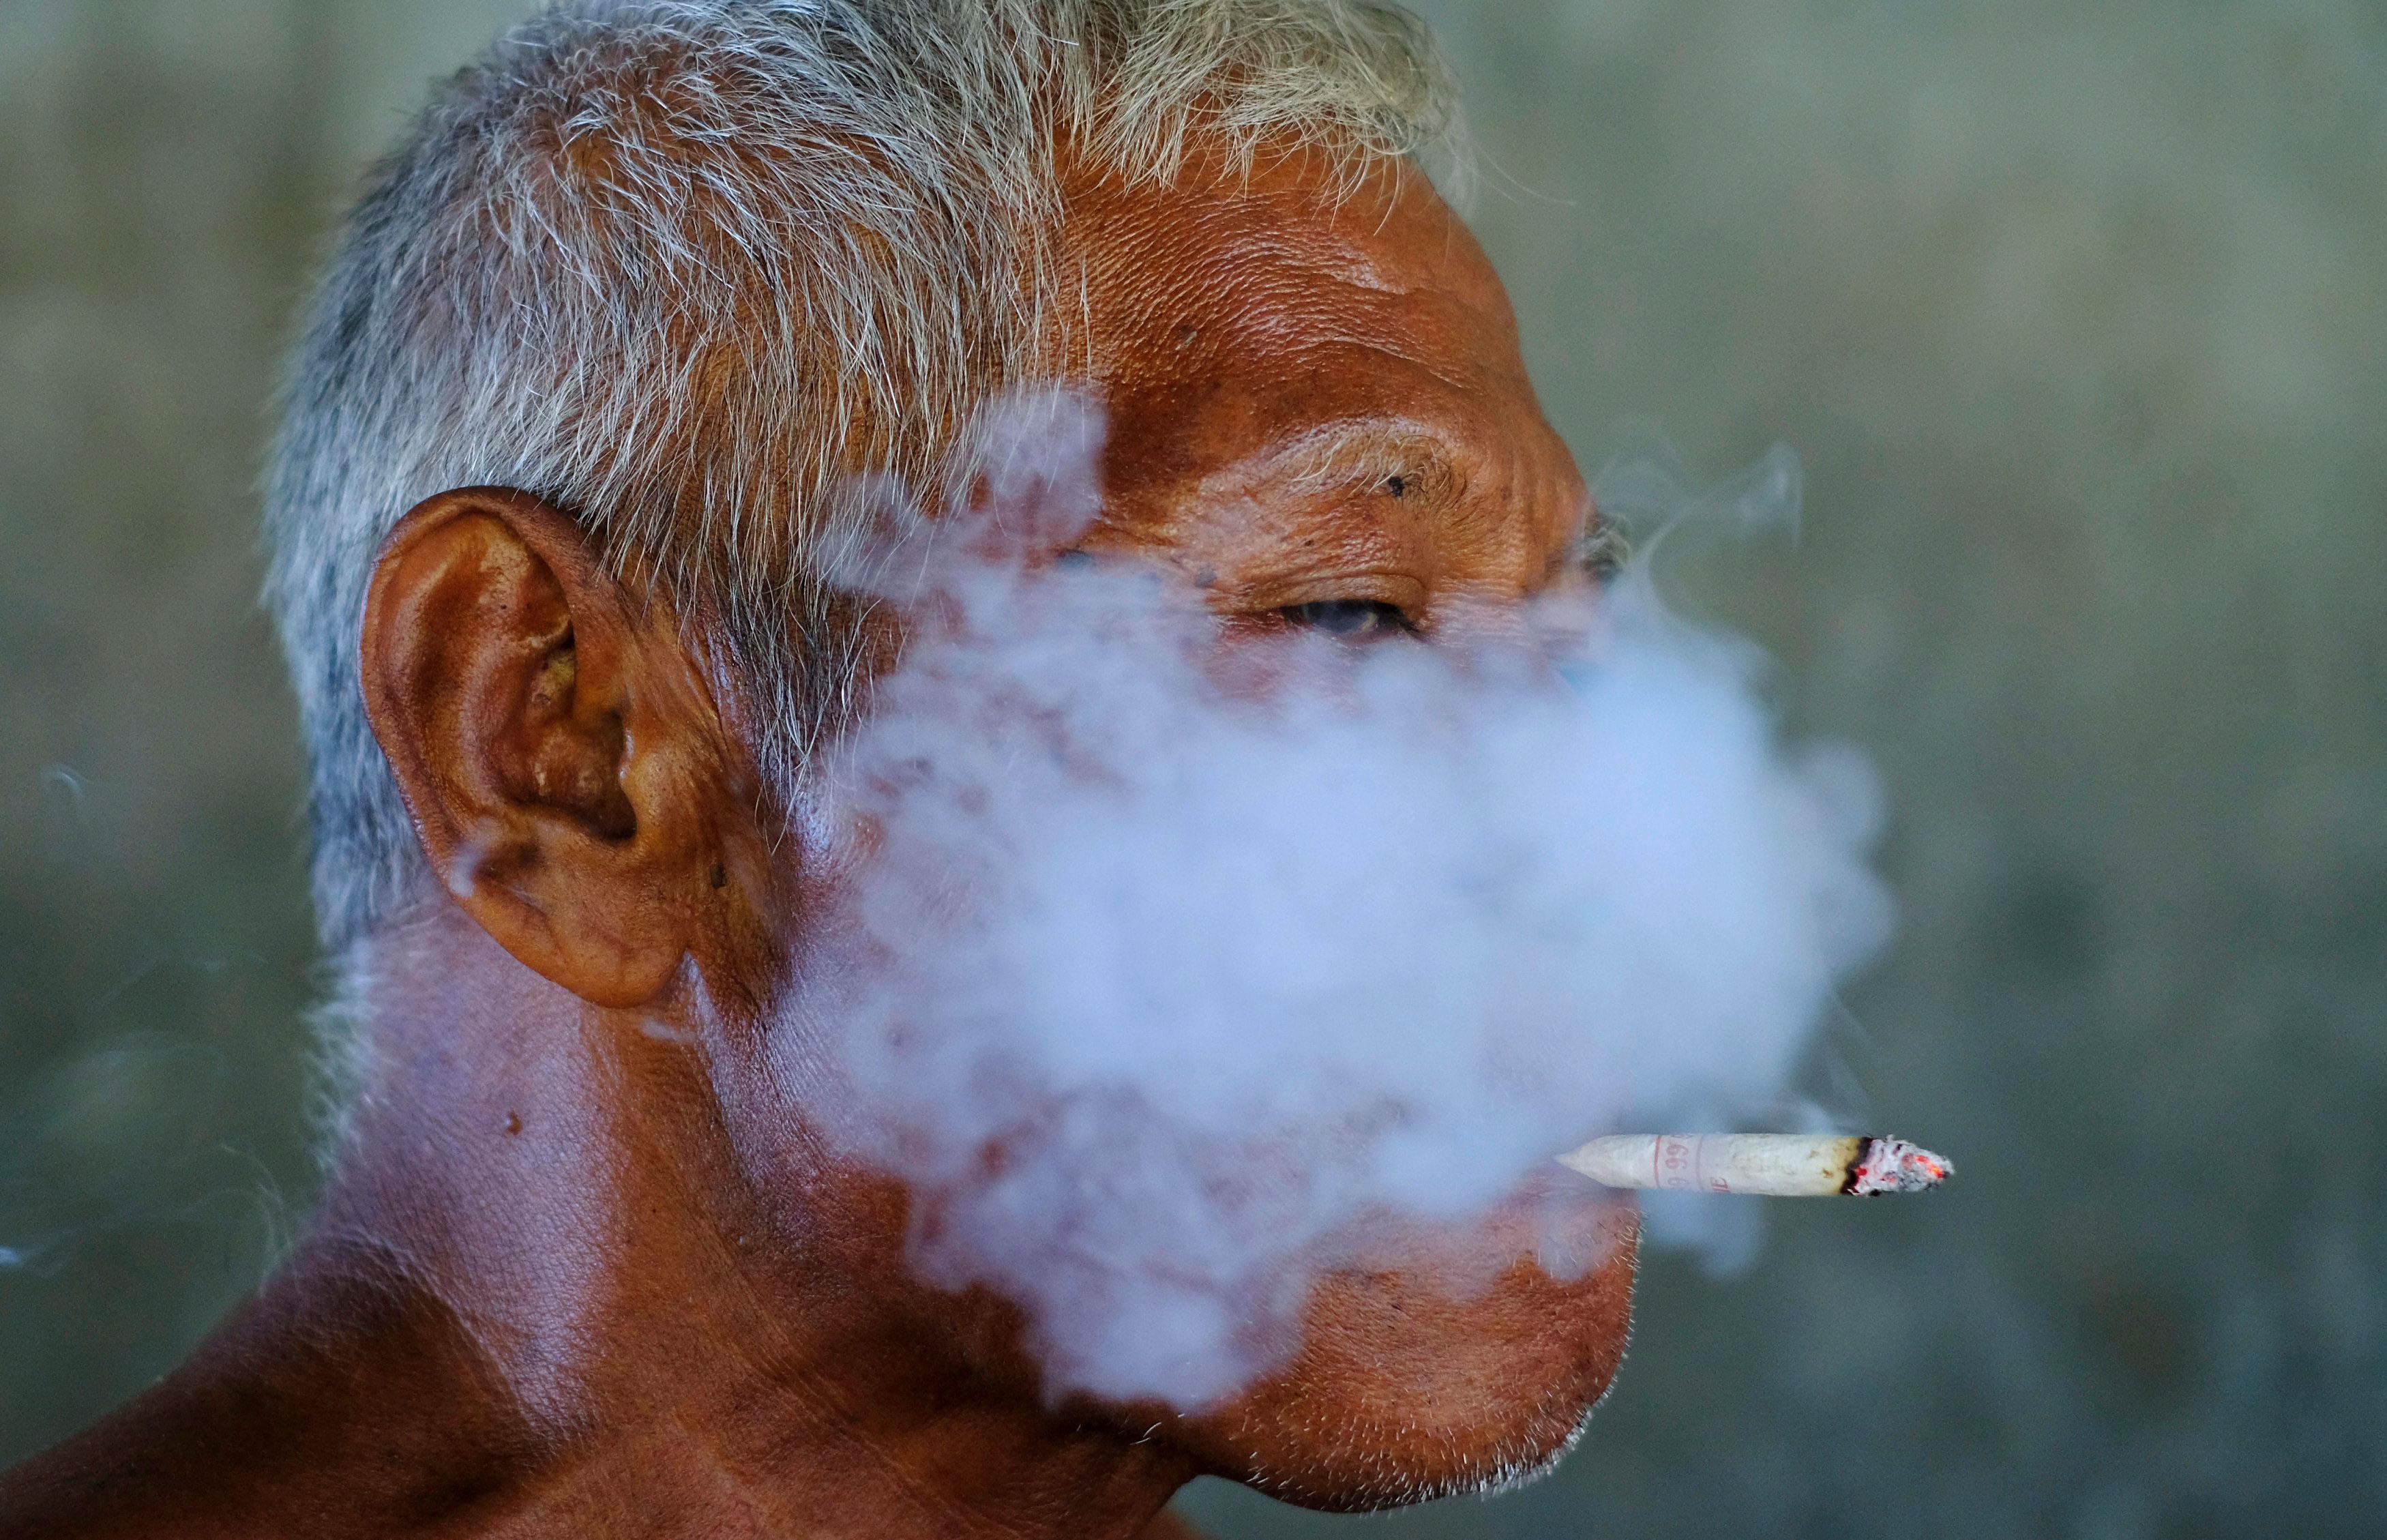 A worker smokes a cigarette during a break at a fabric factory in Solo